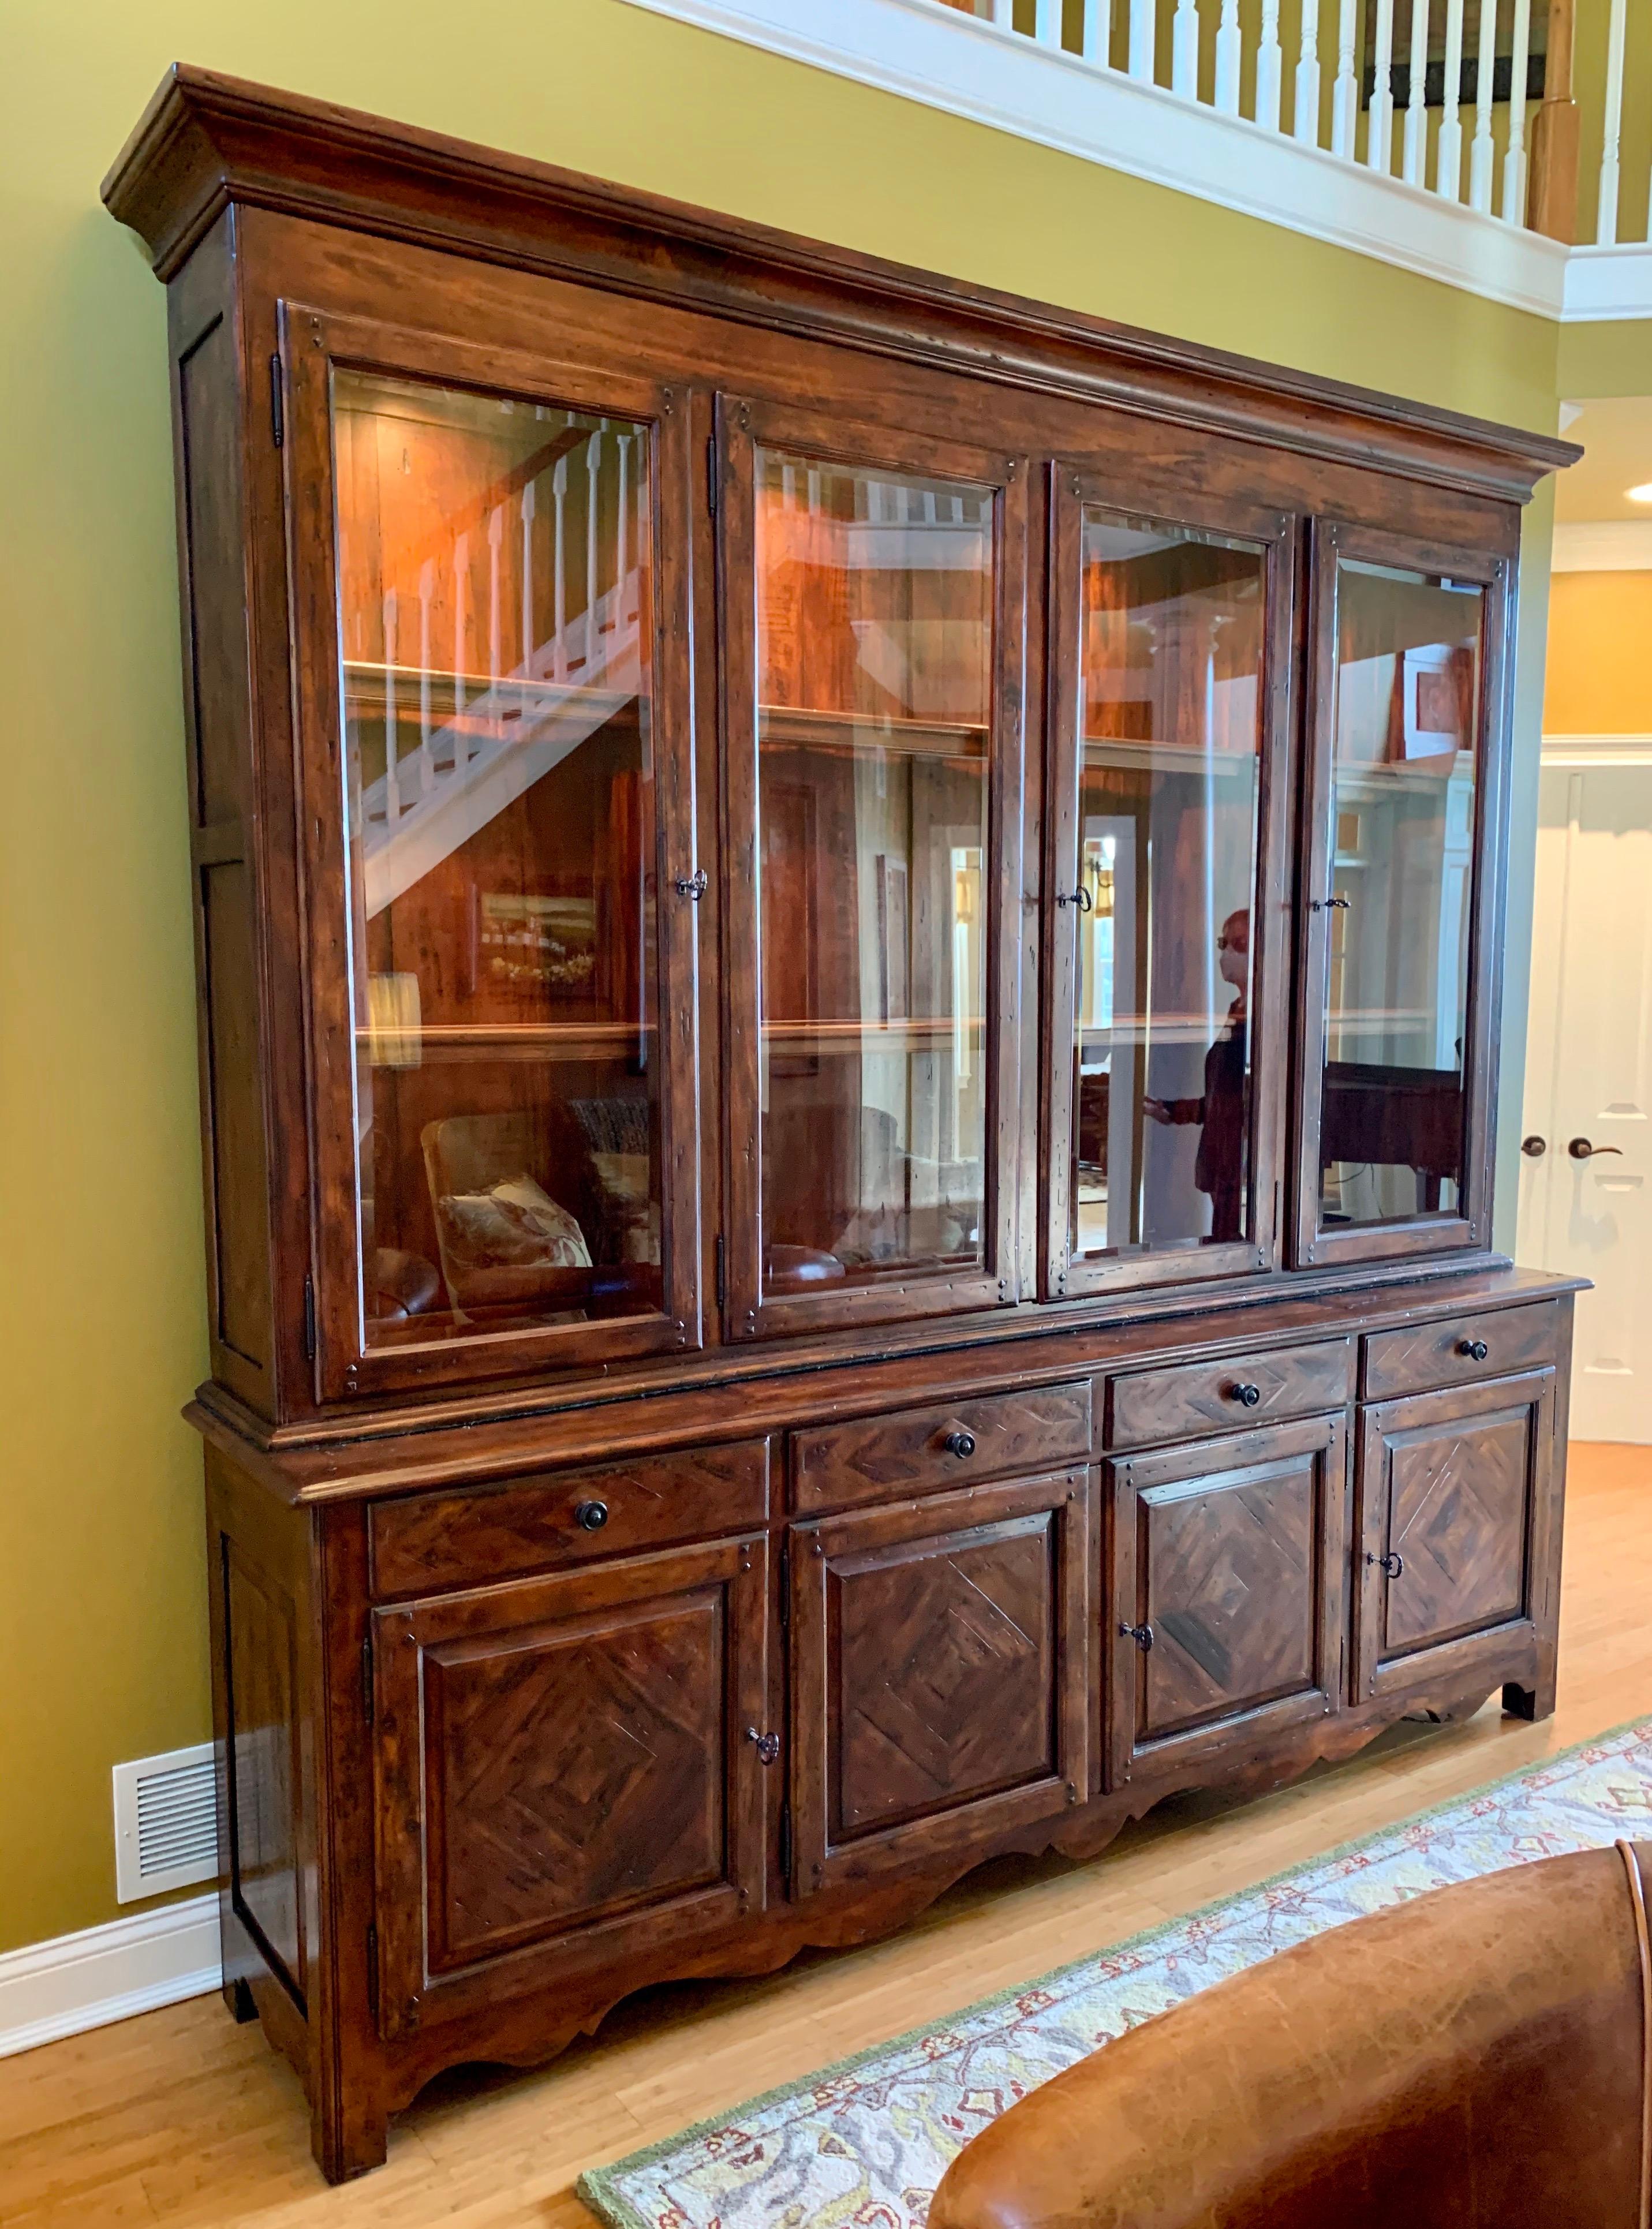 Theodore Alexander Castle Bromwich large china display cabinet has an antique mahogany finish and antique brass hardware. Top part has four glass doors and is illuminated from above unto its adjustable glass shelves. Bottom portion has four drawers